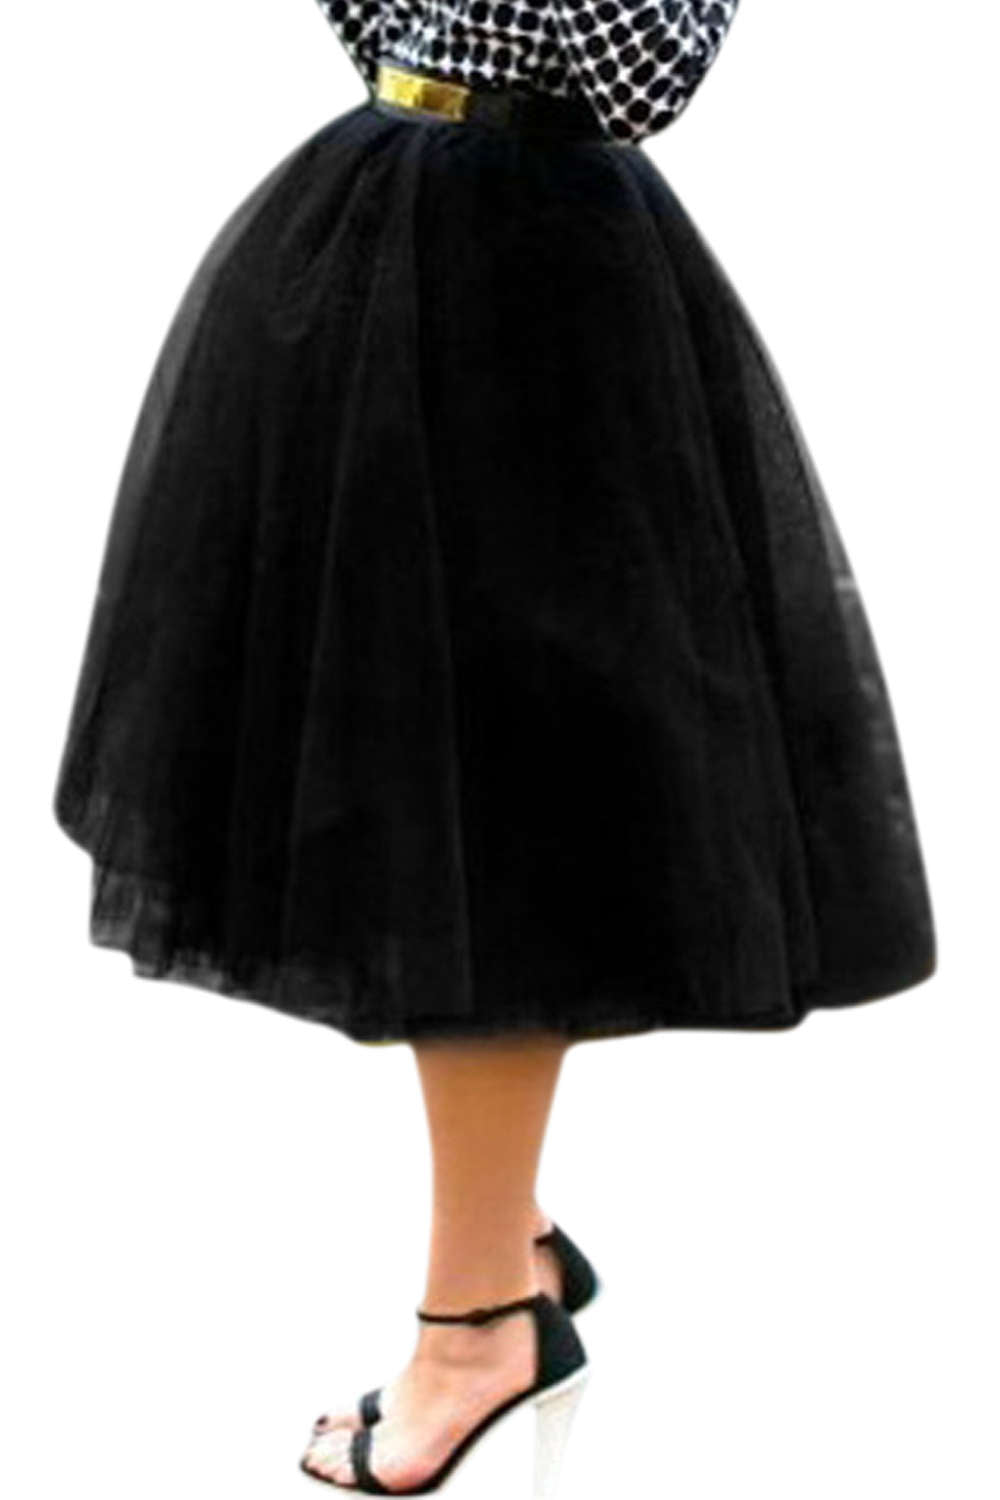 Iyasson Women's A Line Knee Length Tutu Tulle Prom Party Skirt